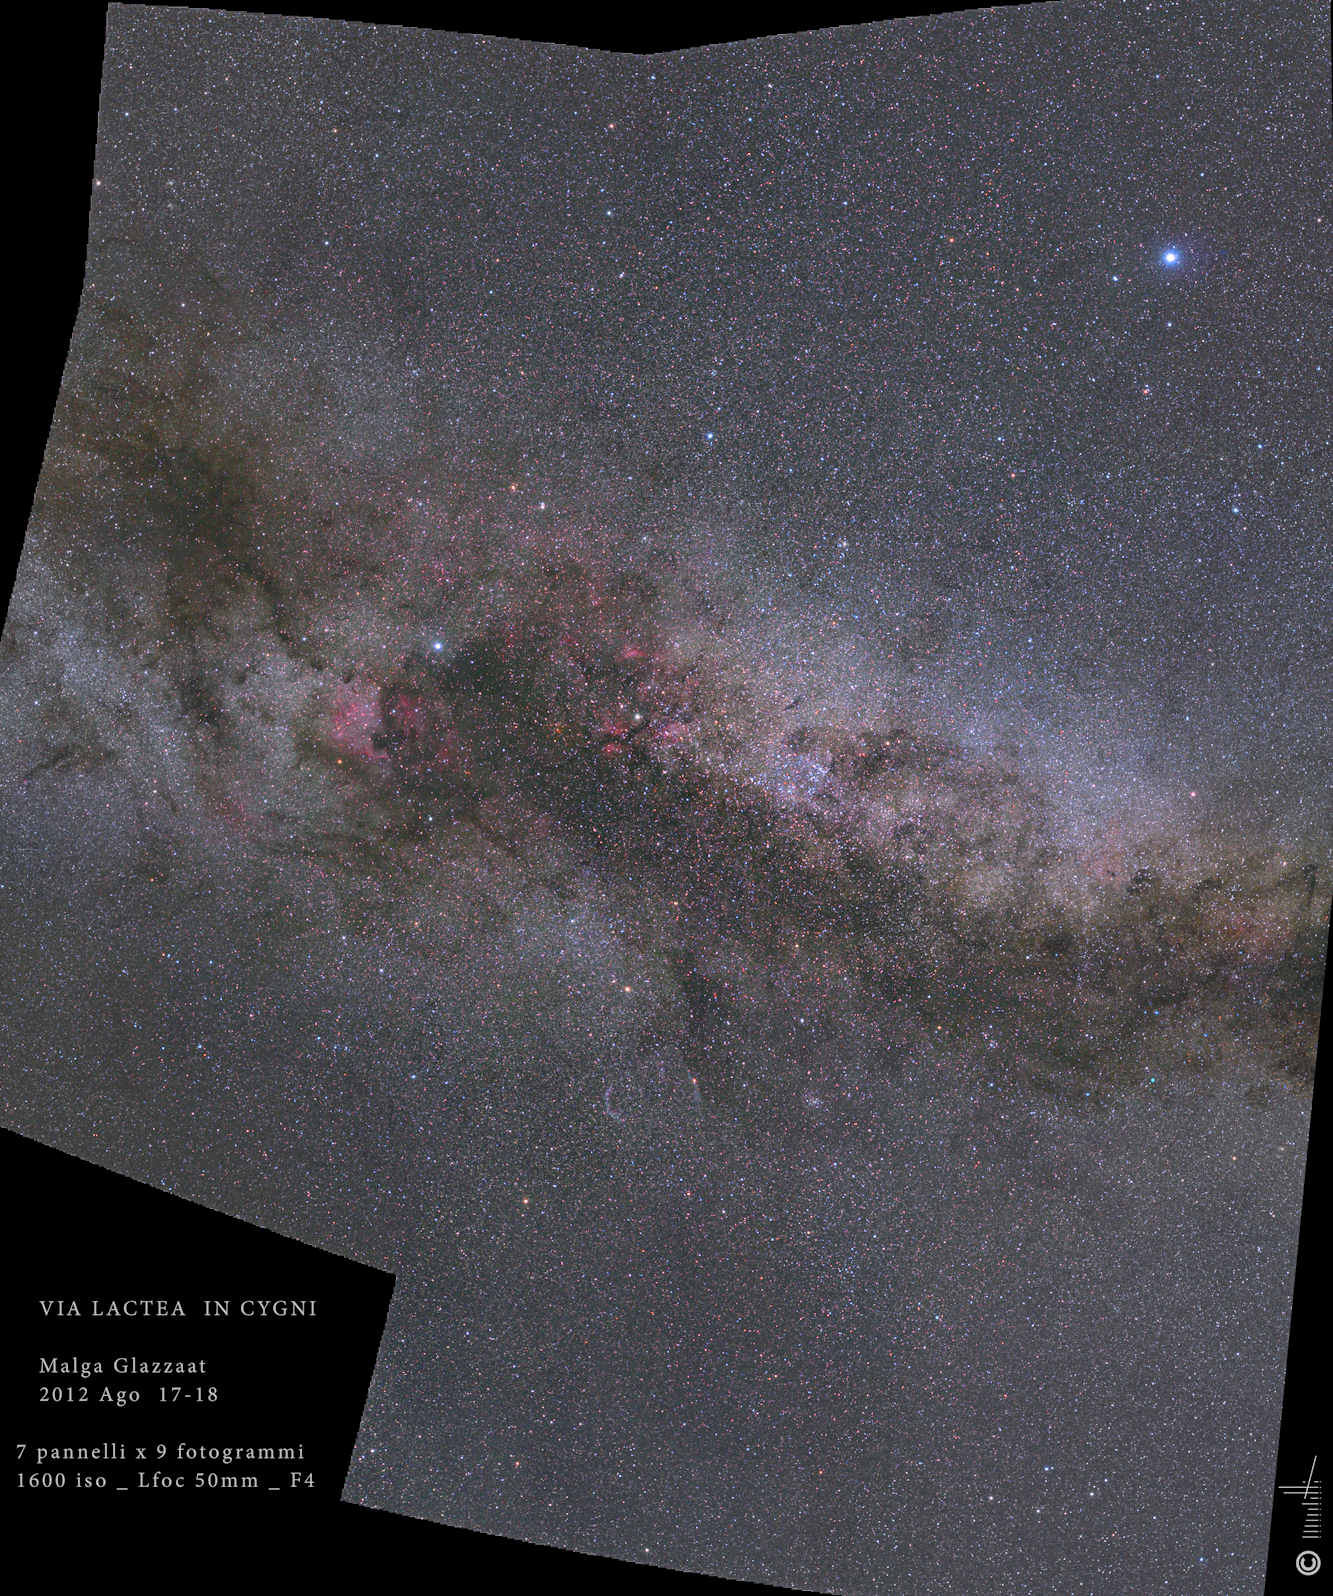 Milky Way in Cygnus and Lyra constellations: 337 KB; click on the image to enlarge